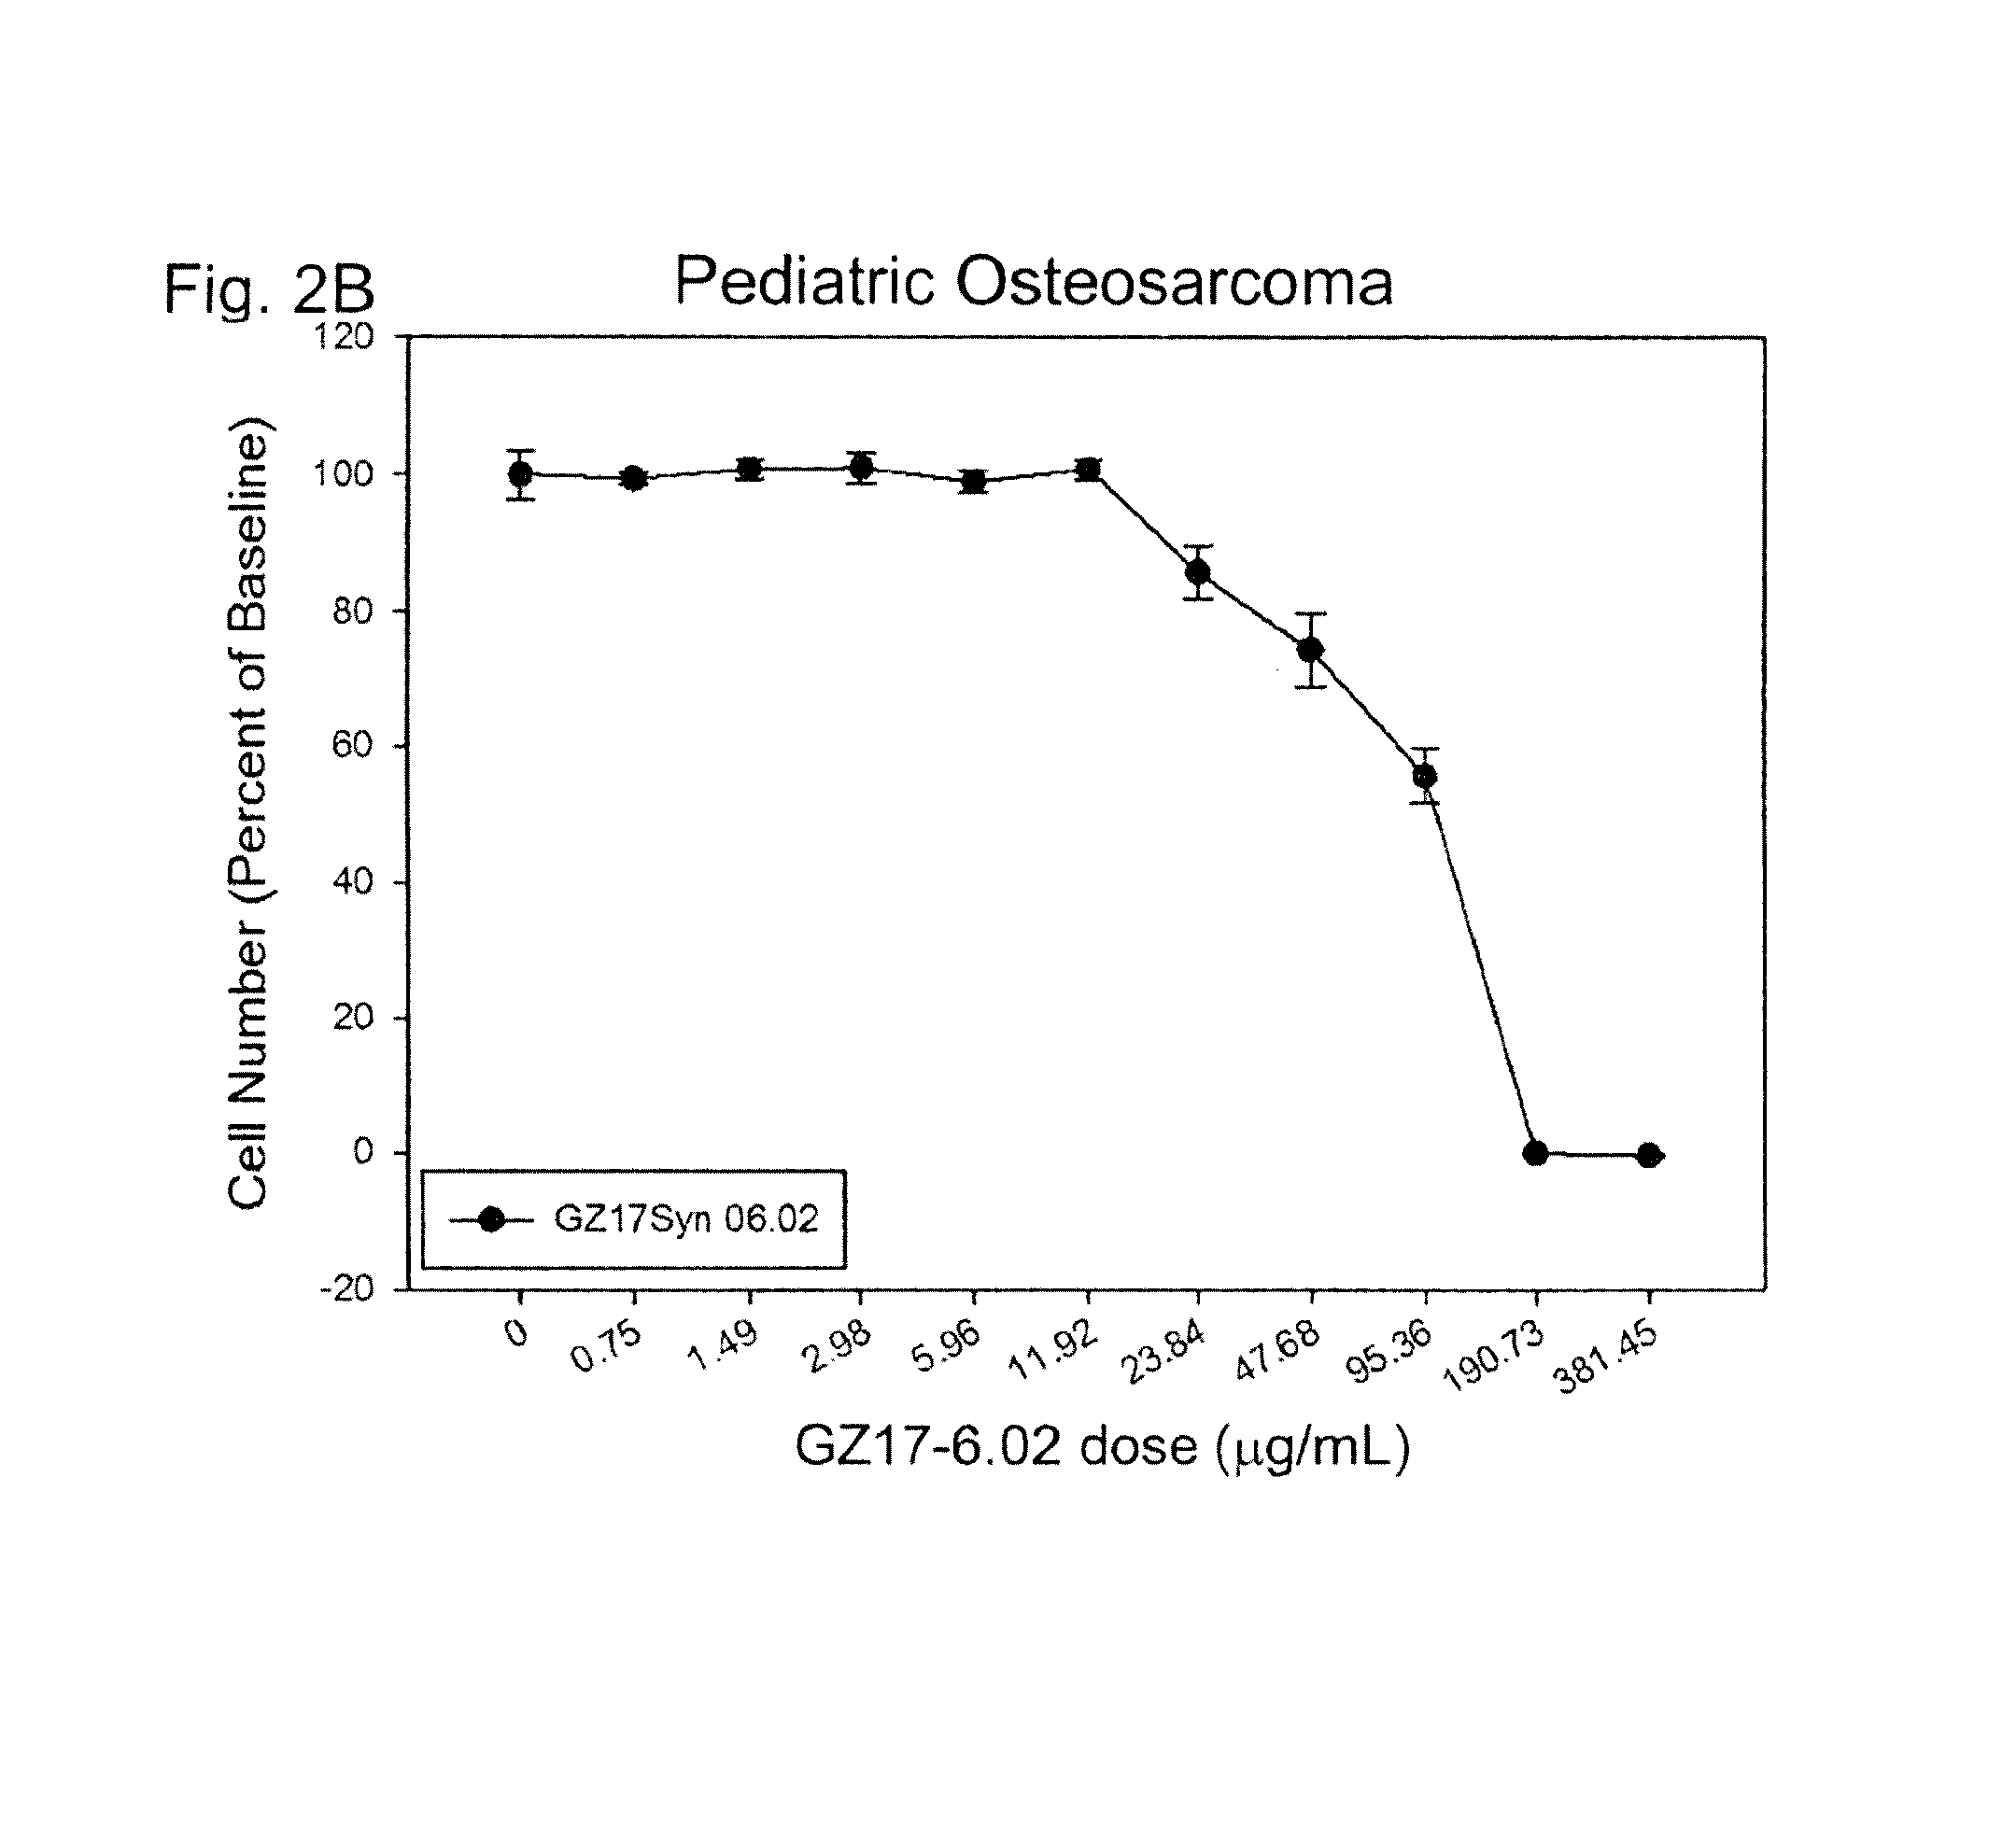 Therapeutic compositions containing harmine and isovanillin components, and methods of use thereof